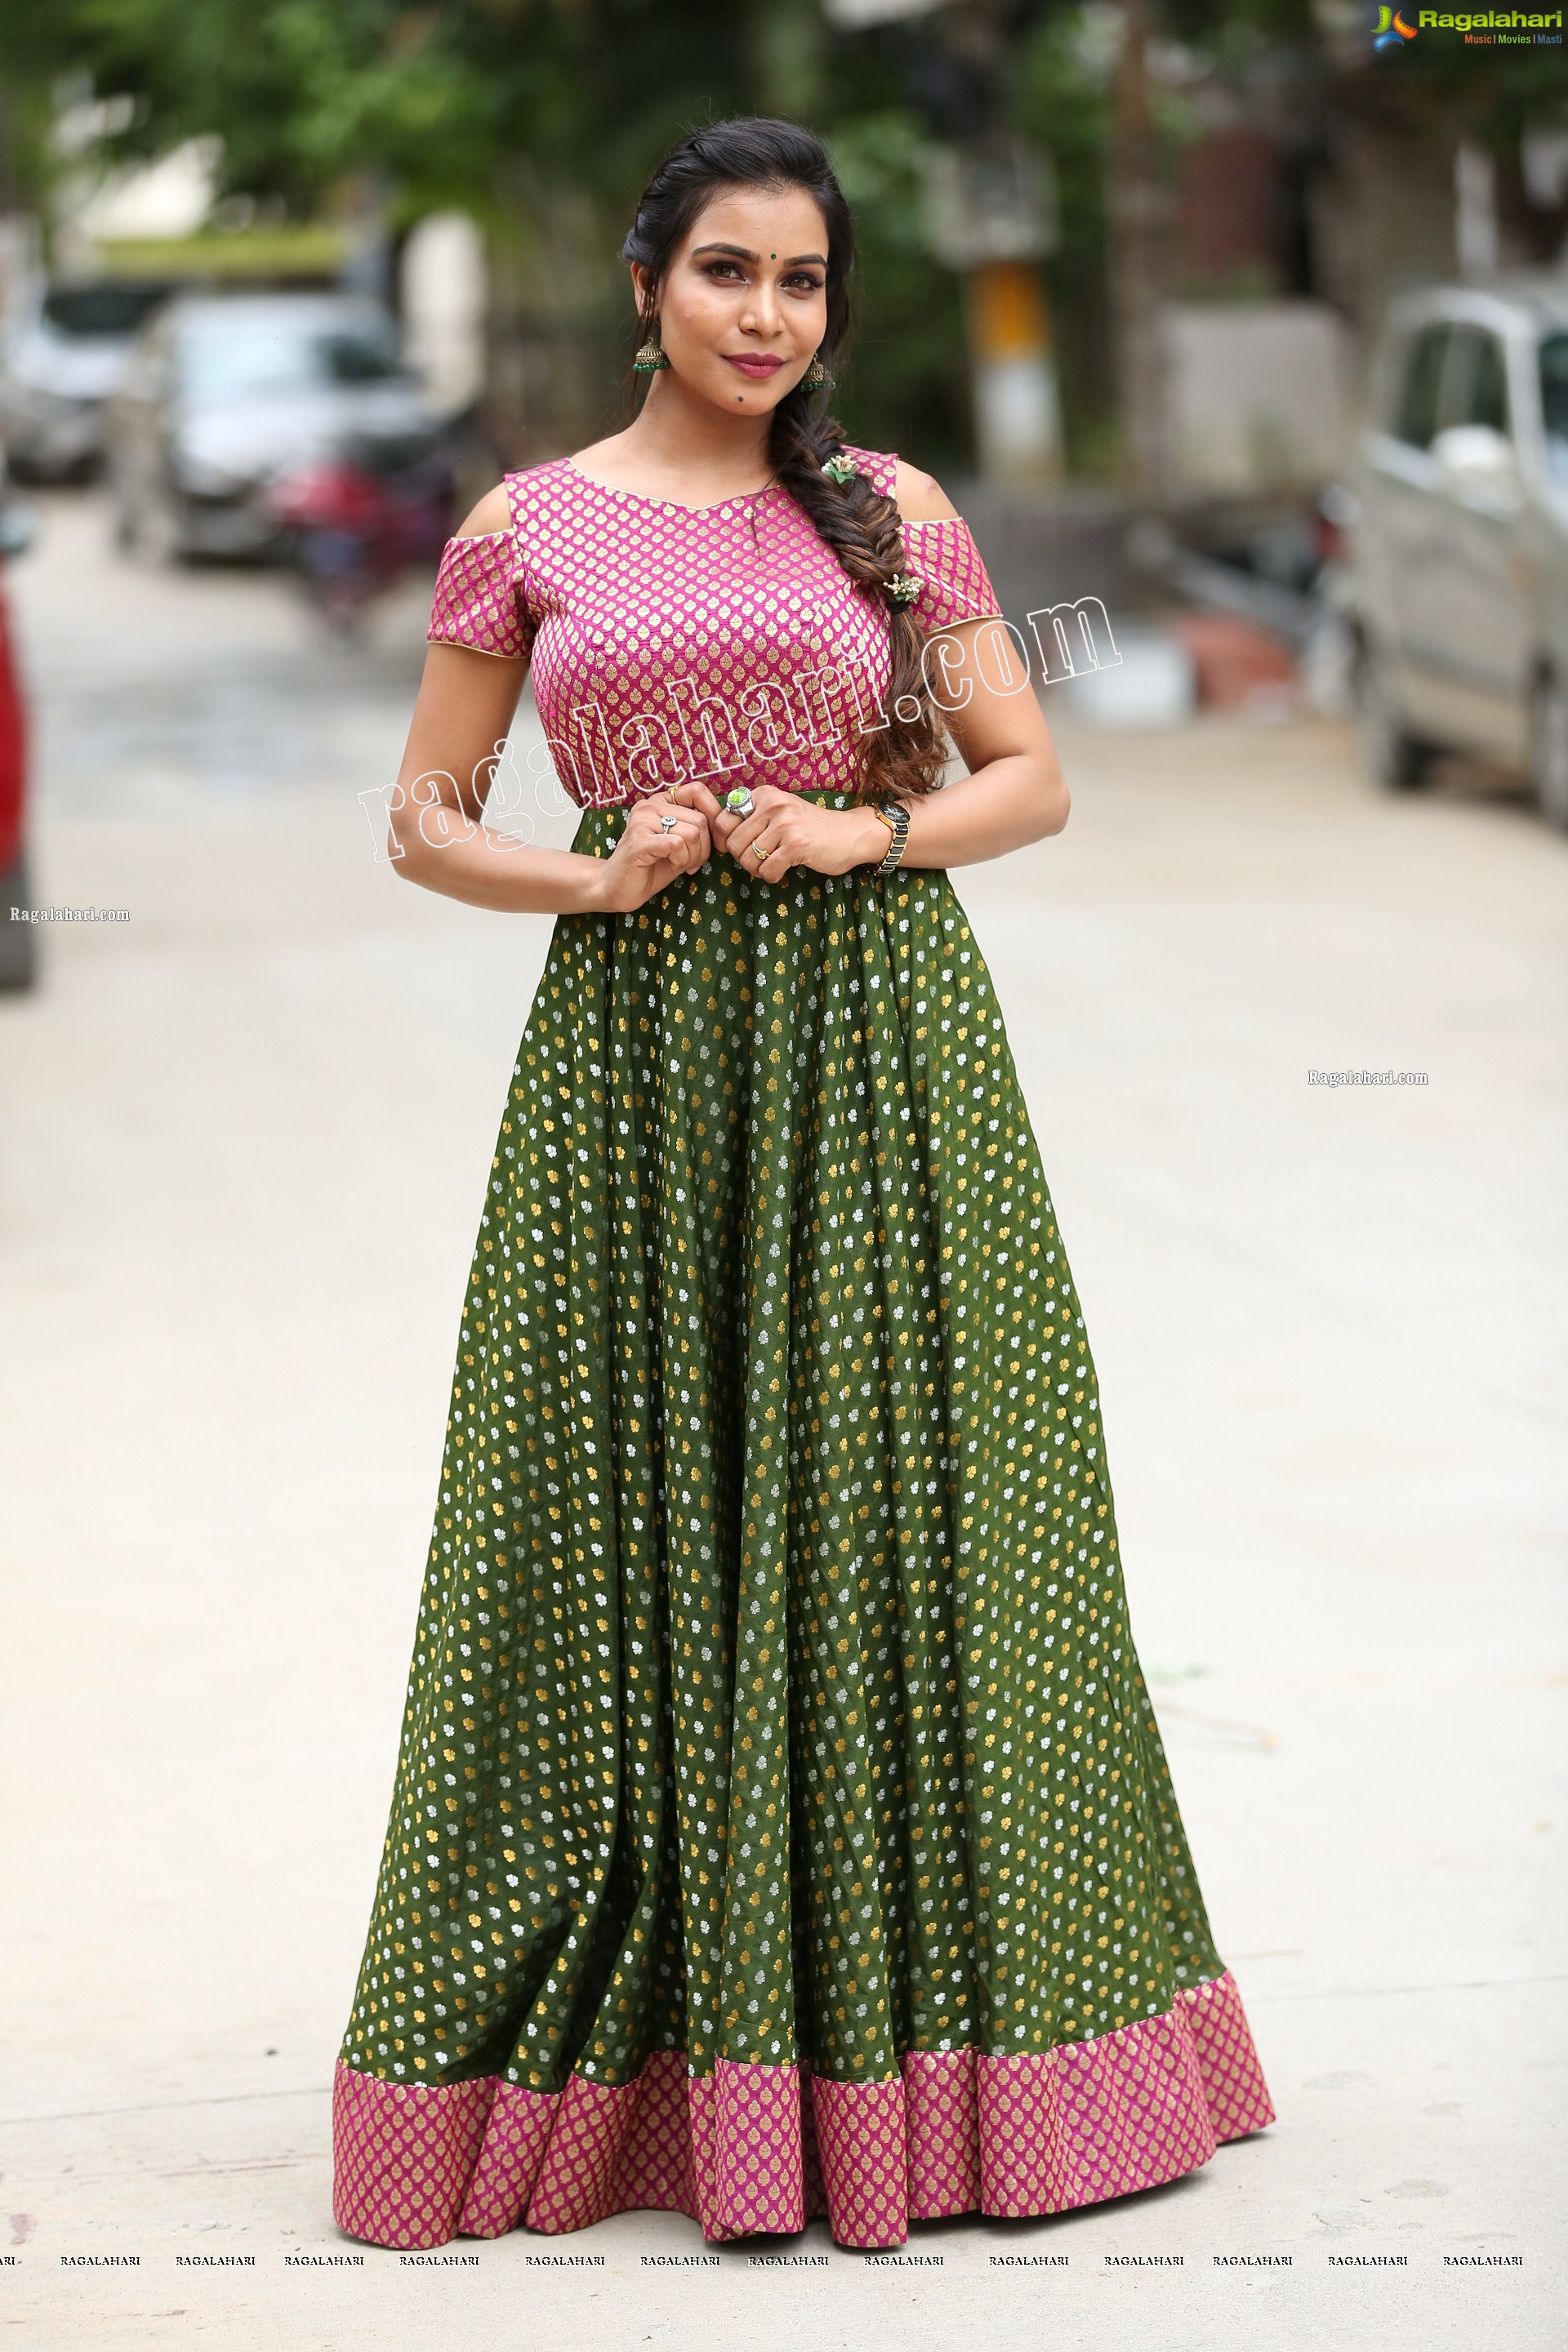 Sanjana Anne in Green and Pink Floor Length Dress Exclusive Photo Shoot